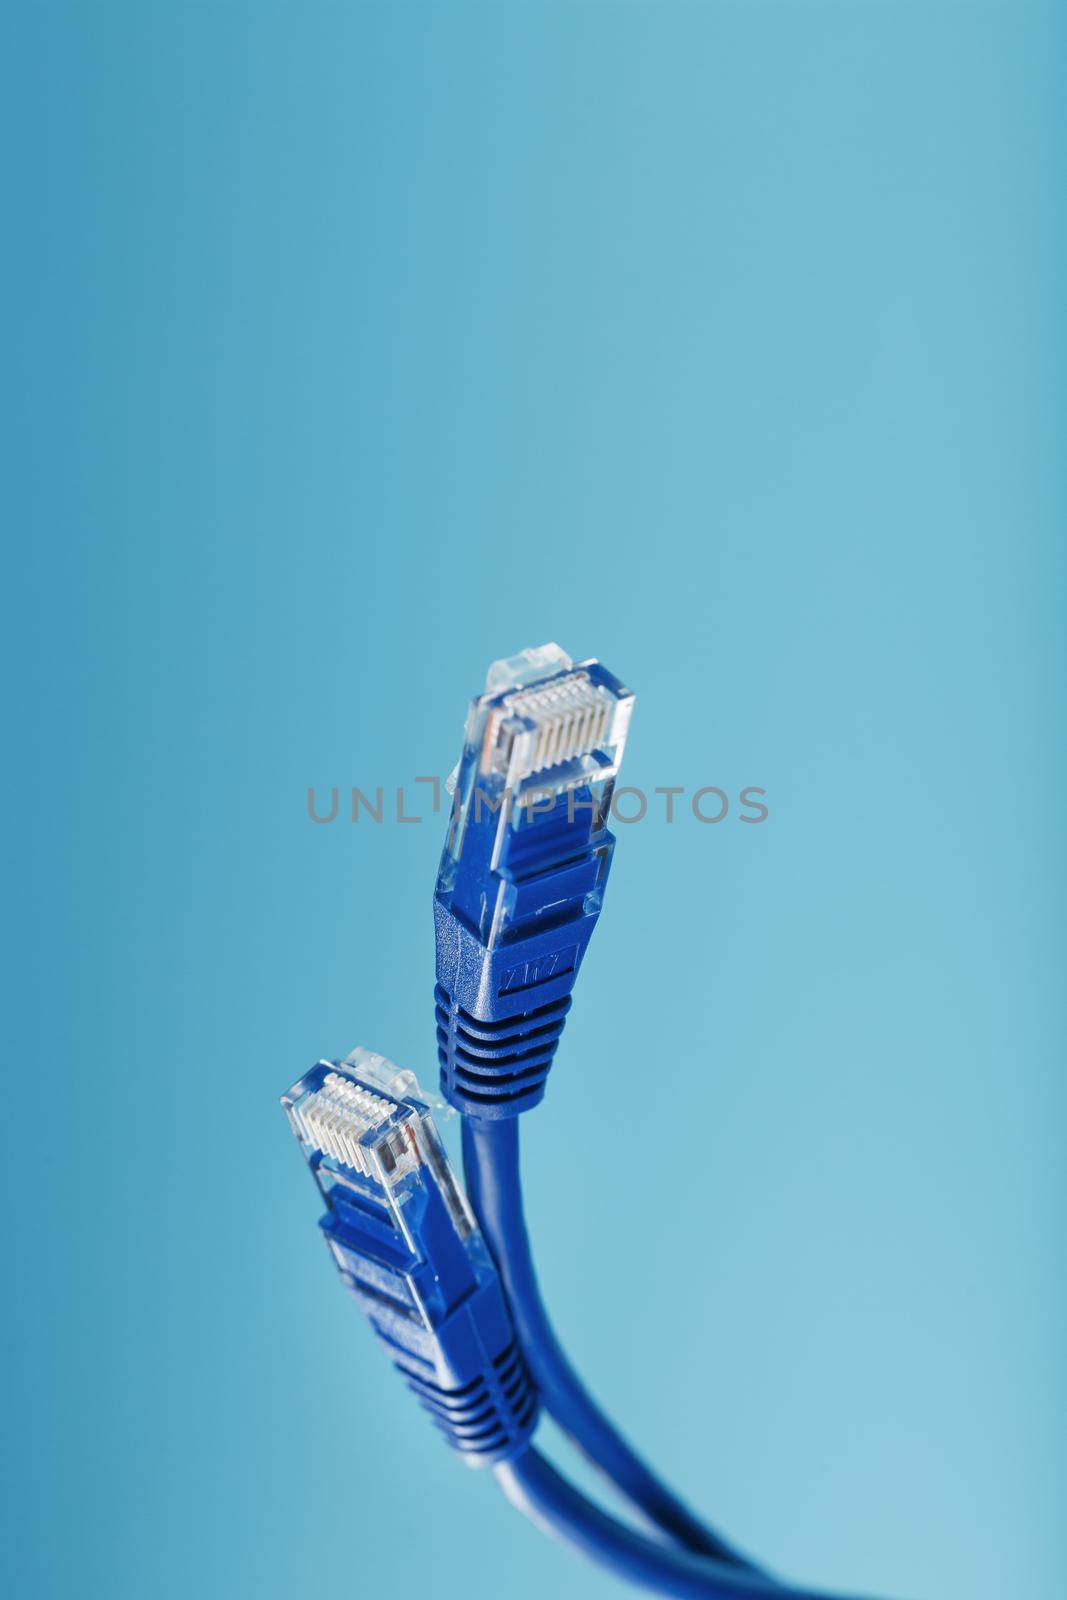 Two Ethernet Cable Connectors Patch cord cord close-up isolated on a blue background with free space by AlexGrec